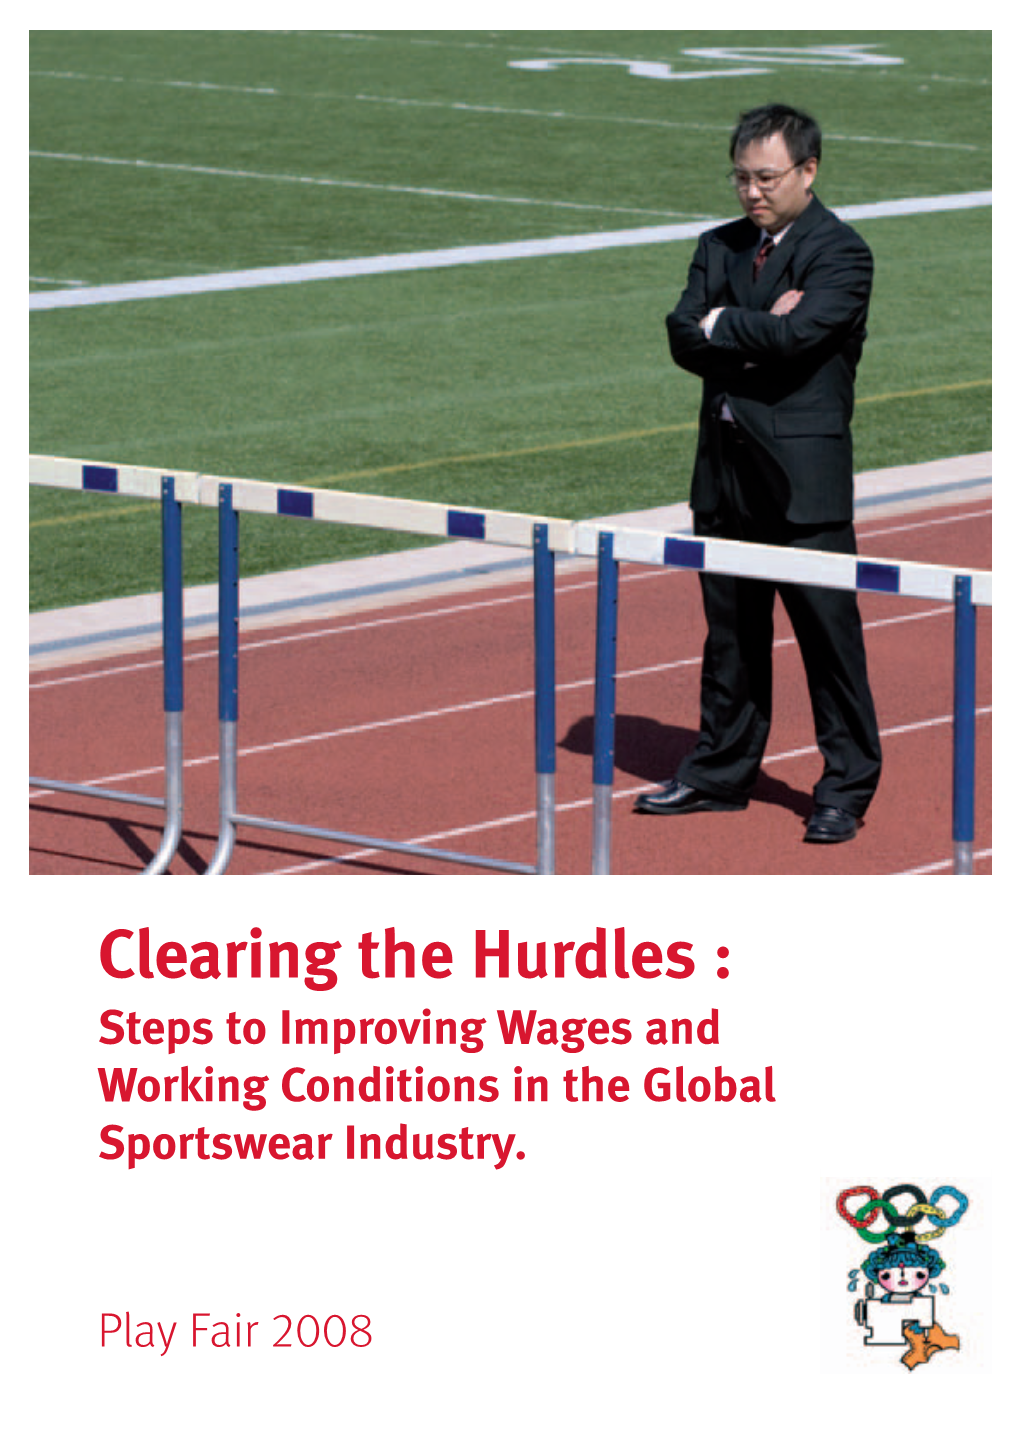 Clearing the Hurdles : Steps to Improving Wages and Working Conditions in the Global Sportswear Industry